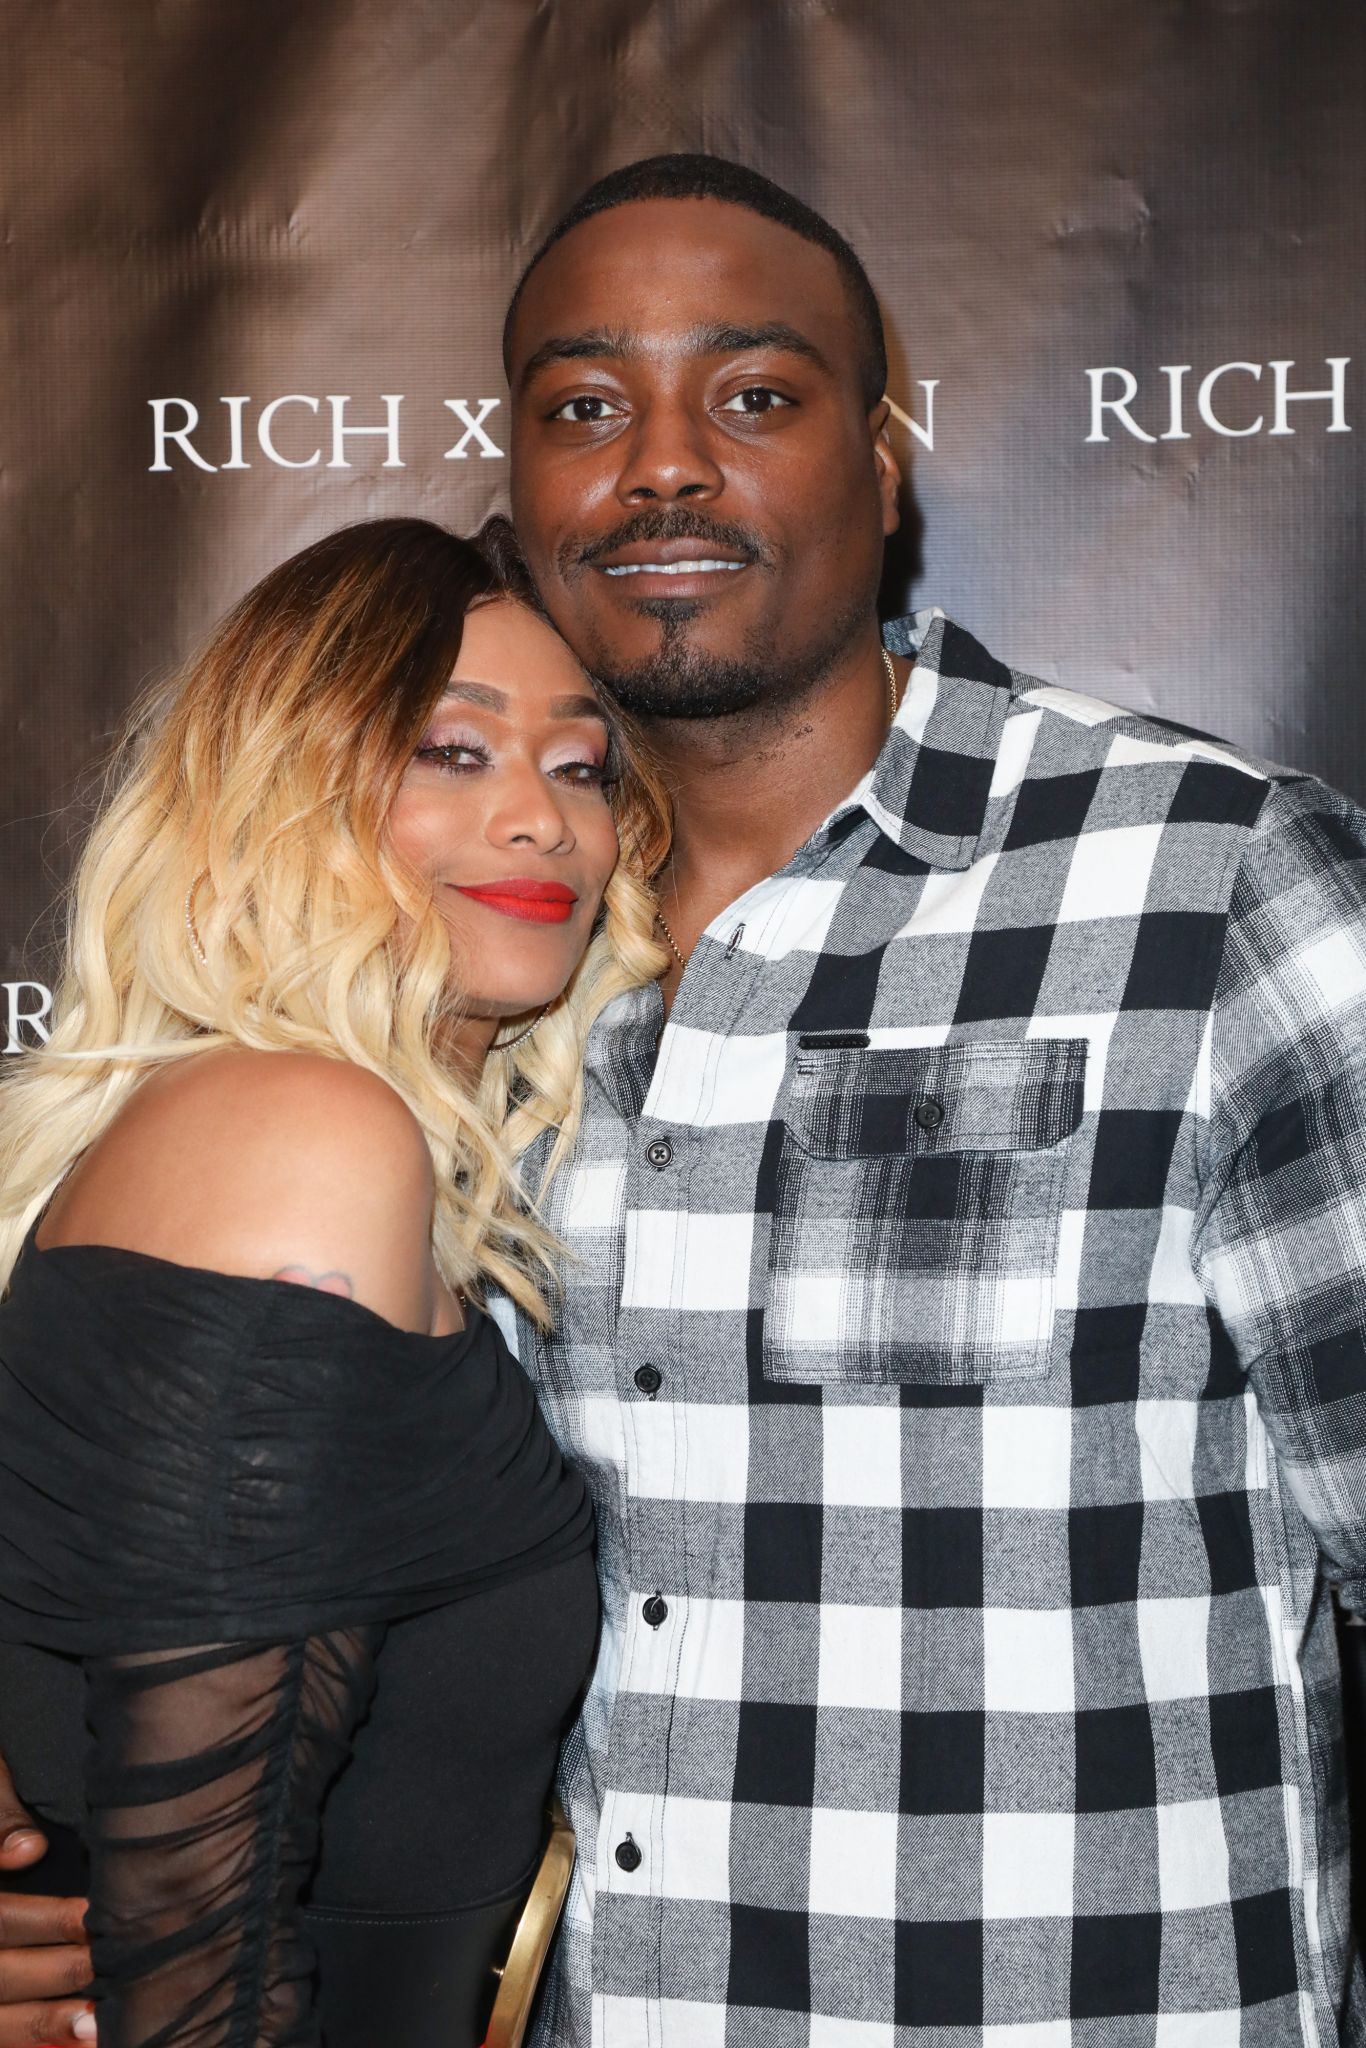 Surprise! Tami Roman And Reggie Youngblood Secretly Married Last Year